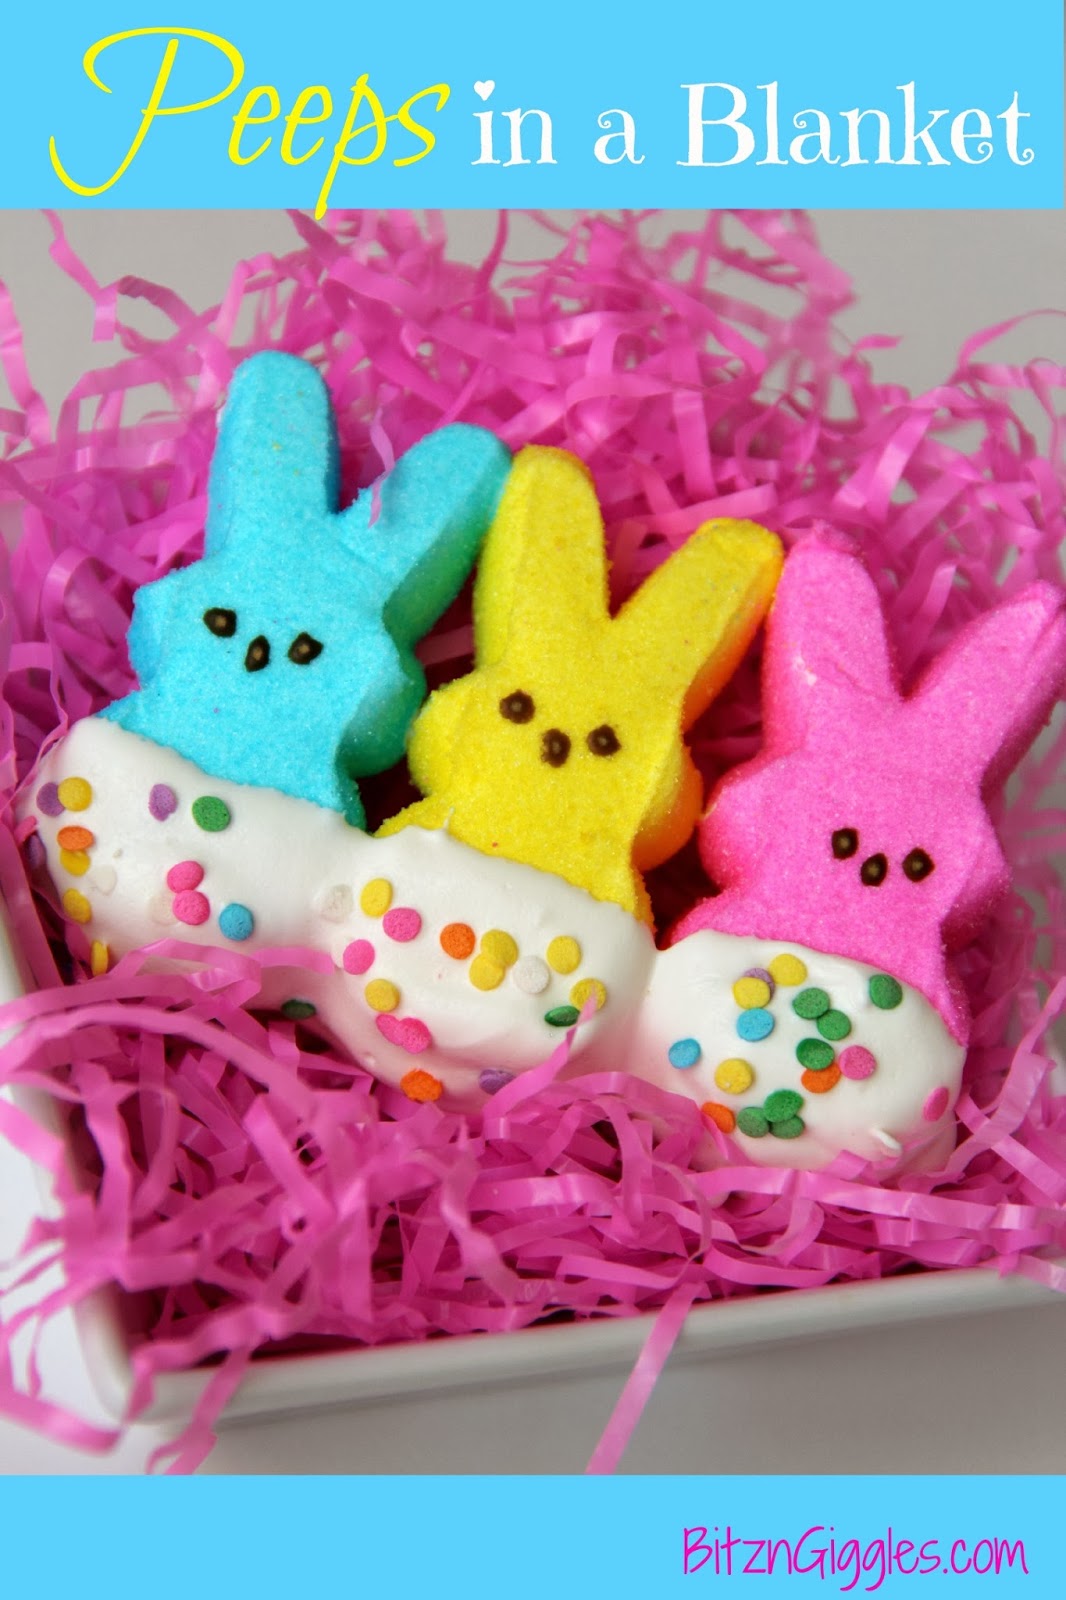 Peeps in a Blanket - A super sweet and cute Easter treat!